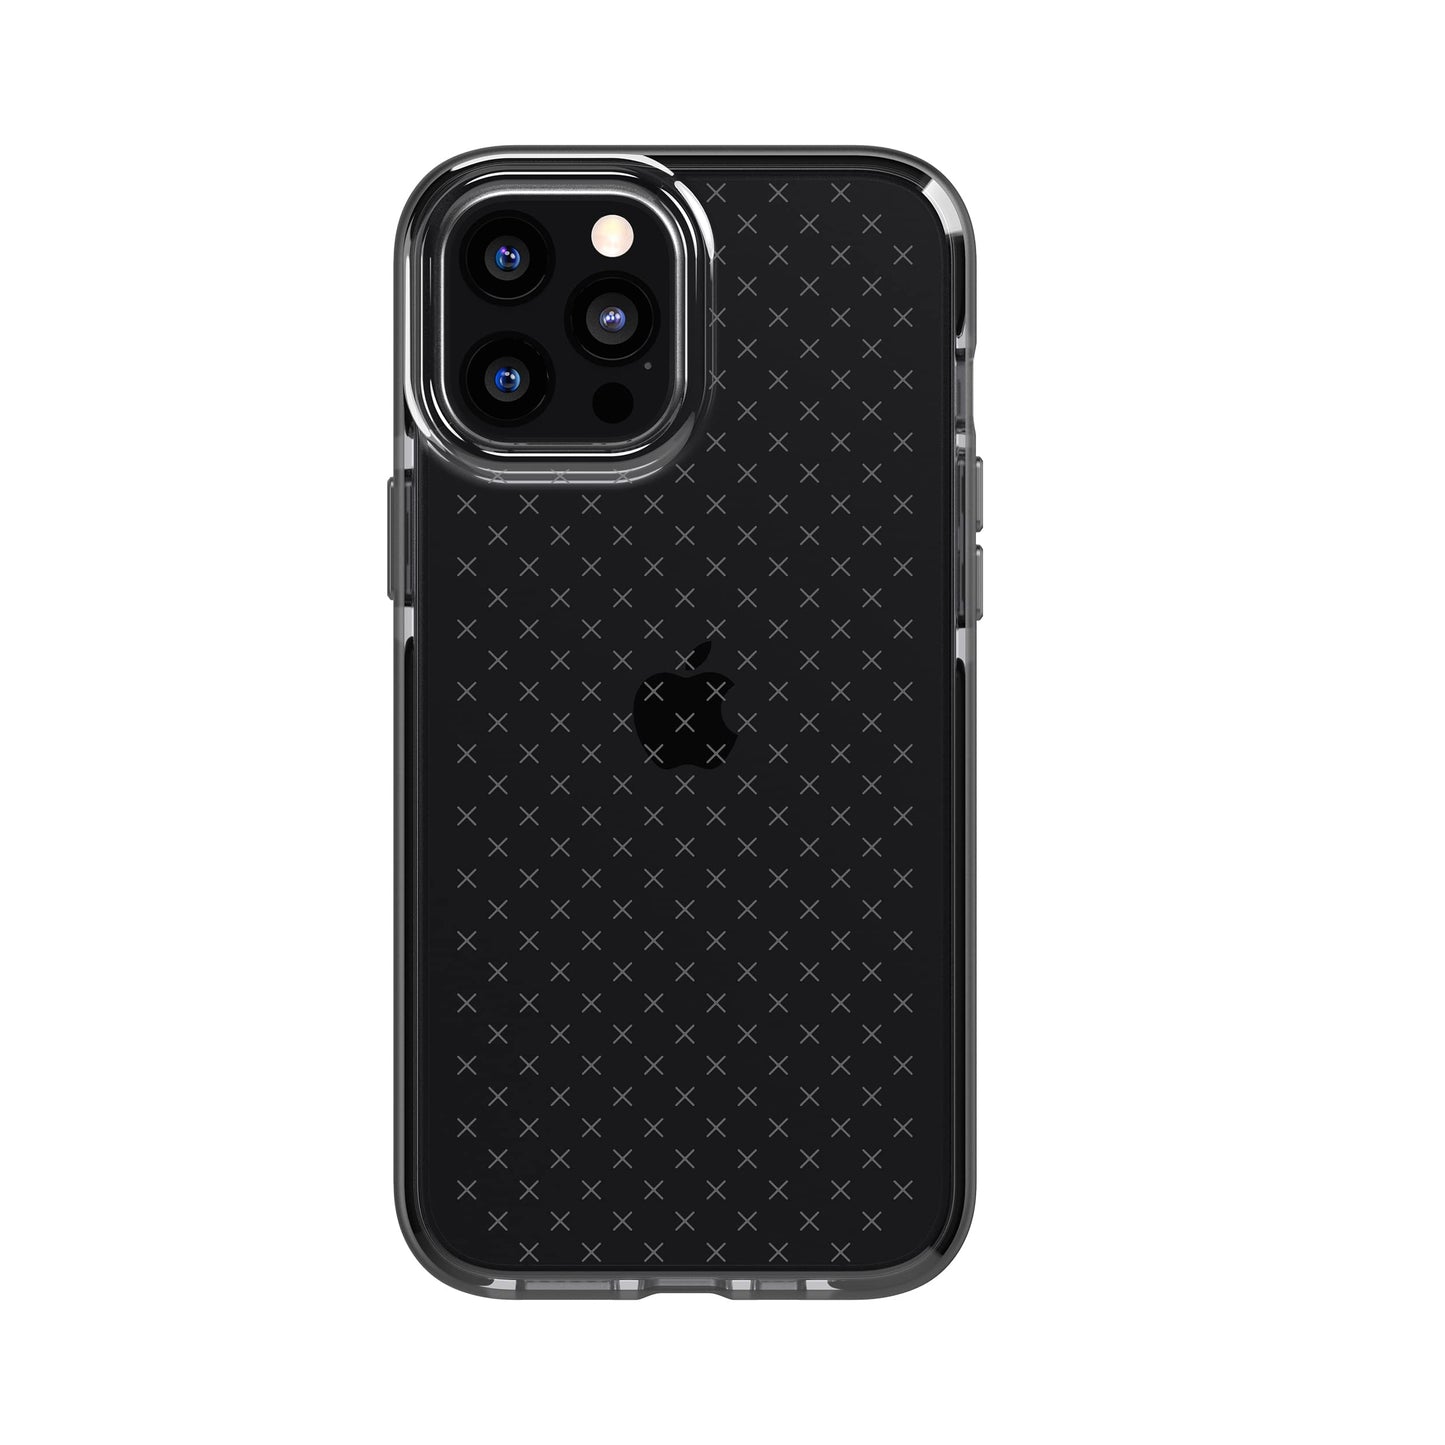 tech21 Evo Check Case for Apple iPhone 12 Pro Max with 12 ft Drop Protection, Smokey/Black